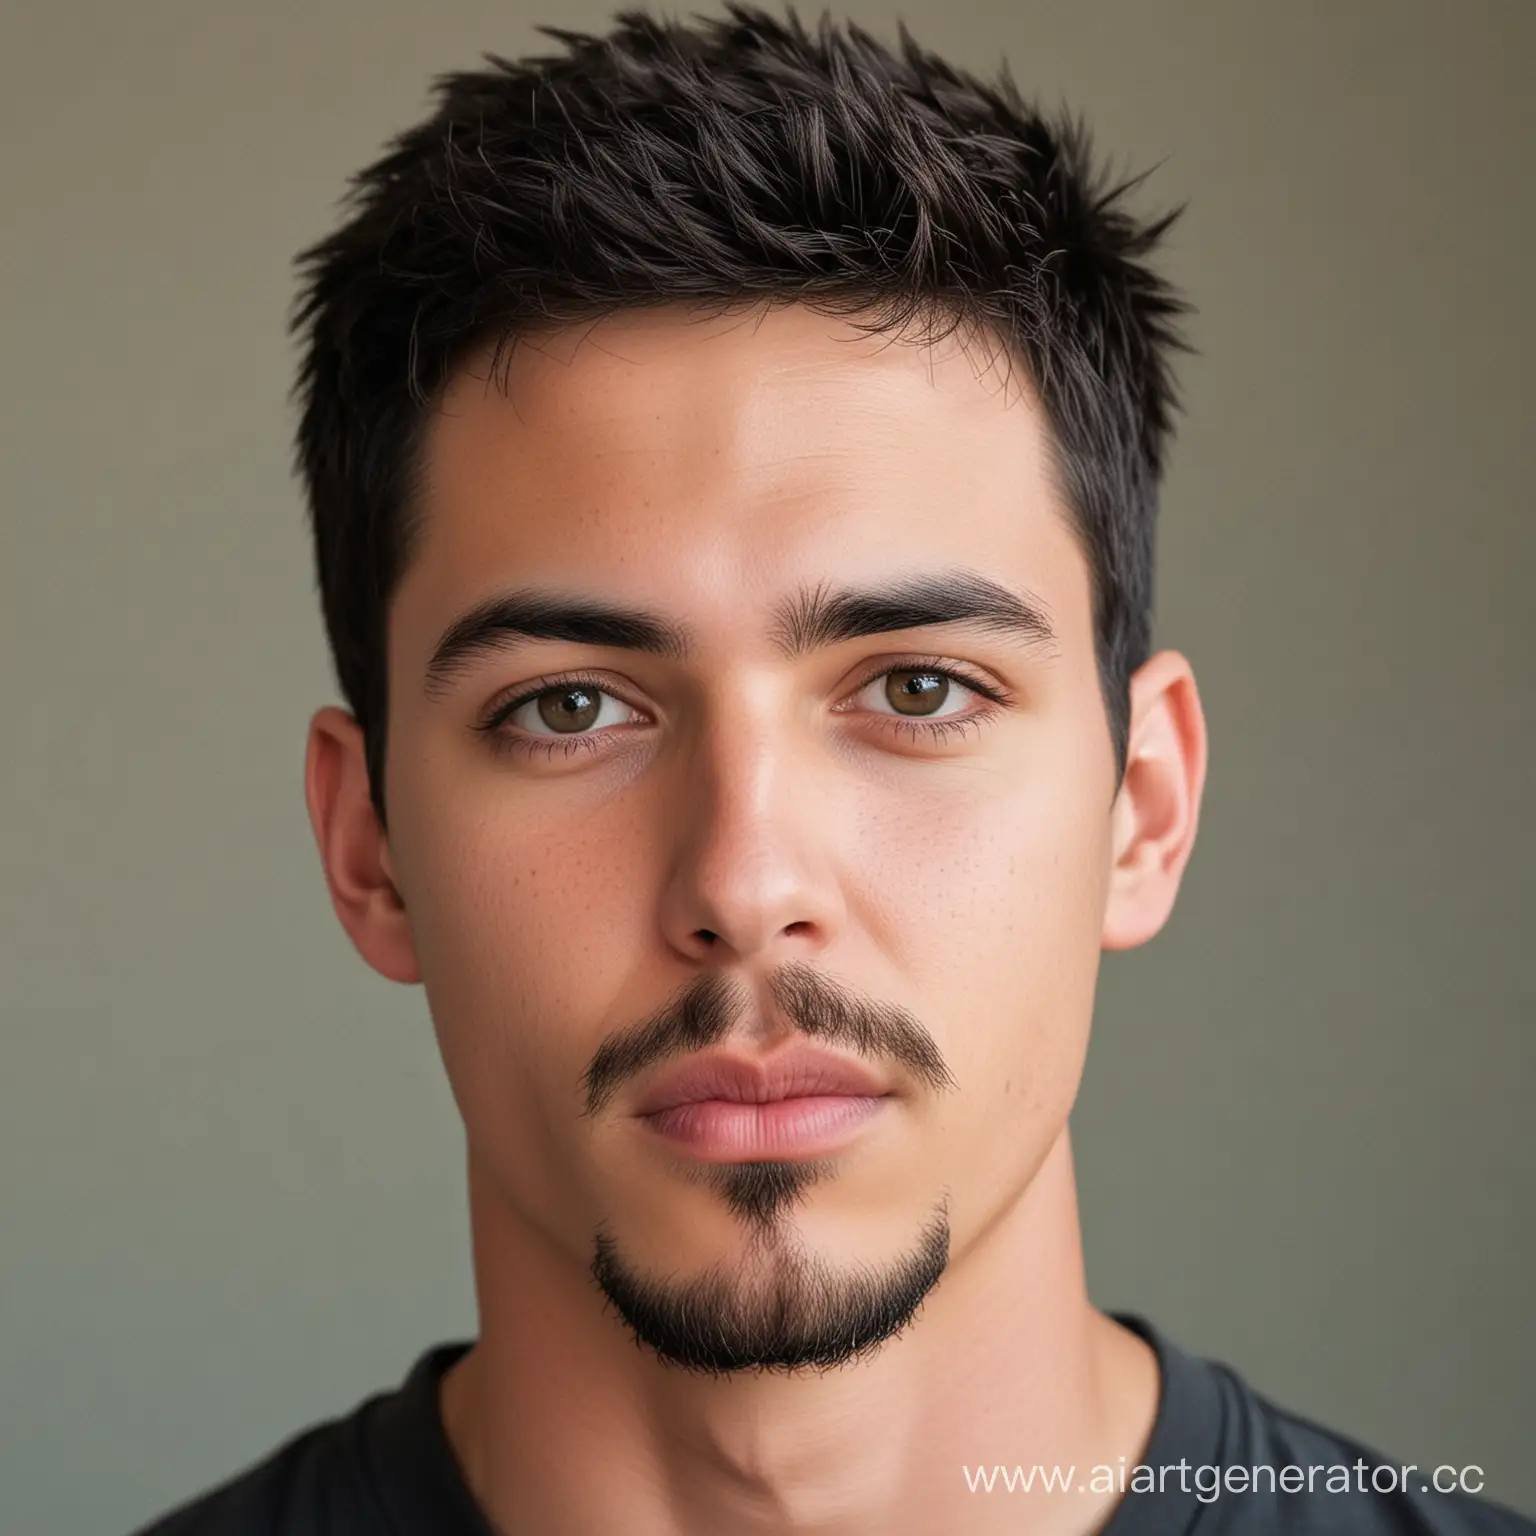 Youthful-Gentleman-with-Distinctive-Sharp-Features-and-Fashionable-Goatee